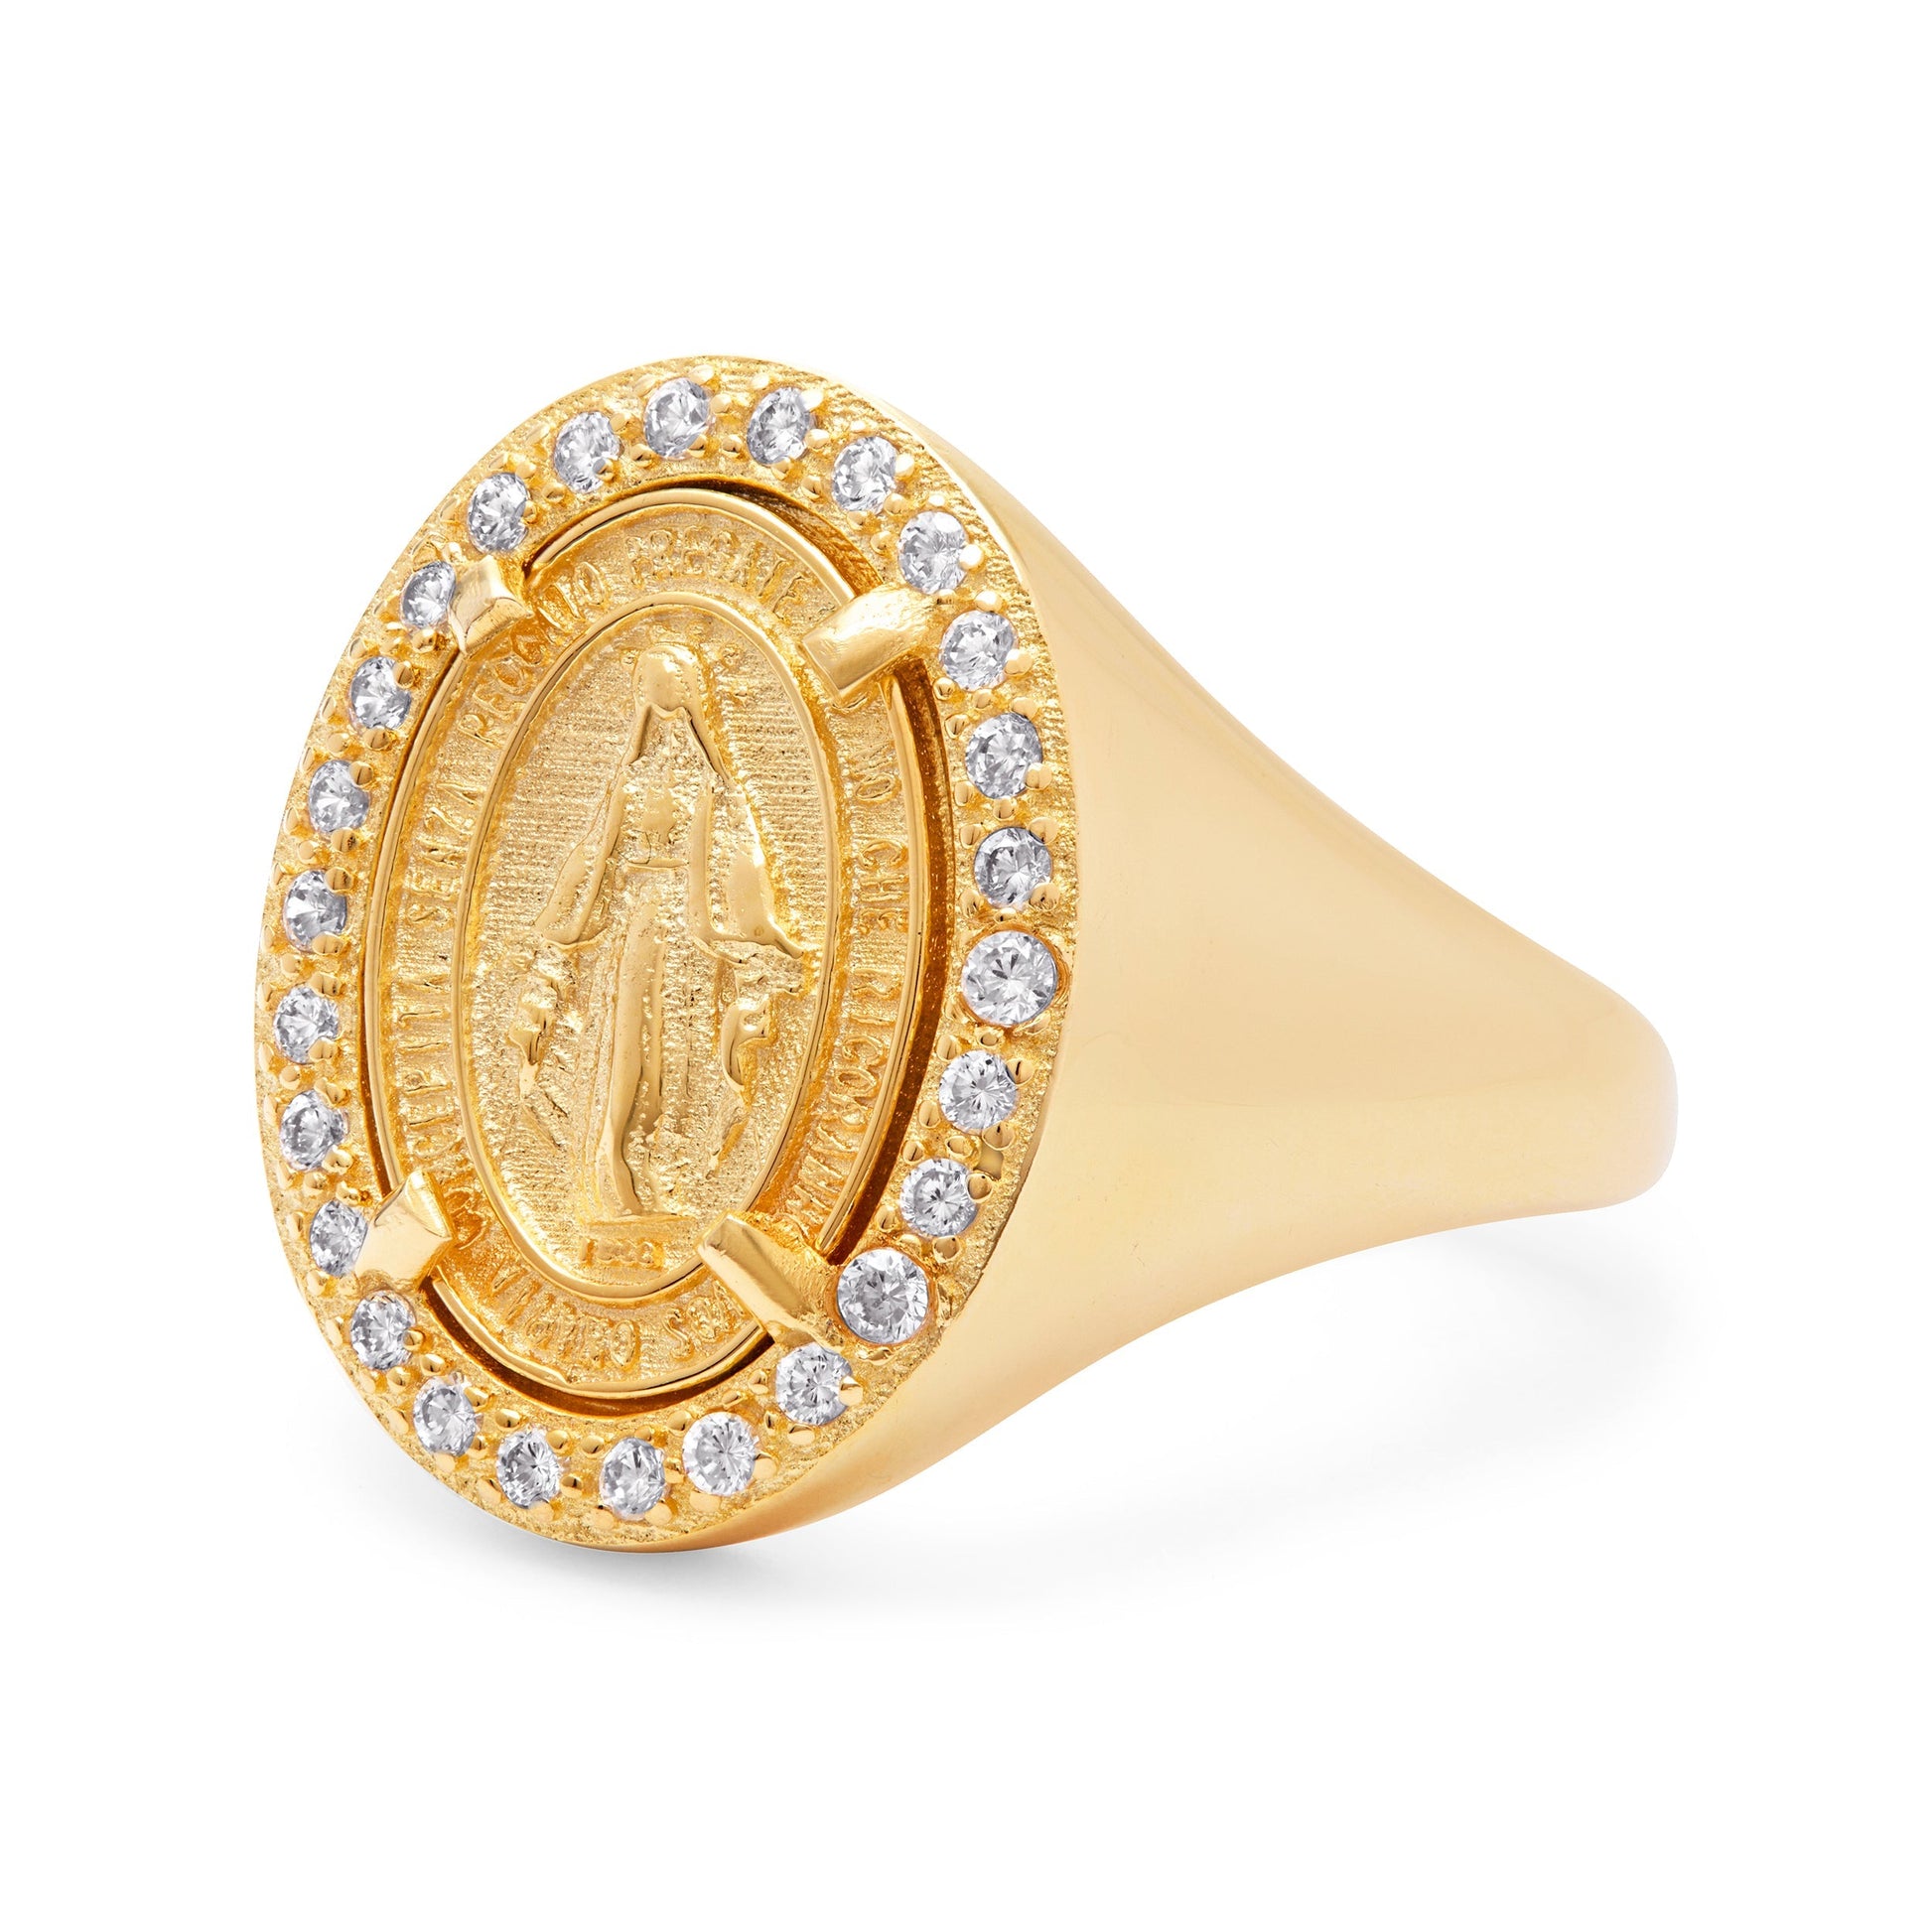 MONDO CATTOLICO Ring Adjustable Gold-plated Sterling Silver Adjustable Chevalier Ring With Miraculous Medal And Cubic Zirconia Details